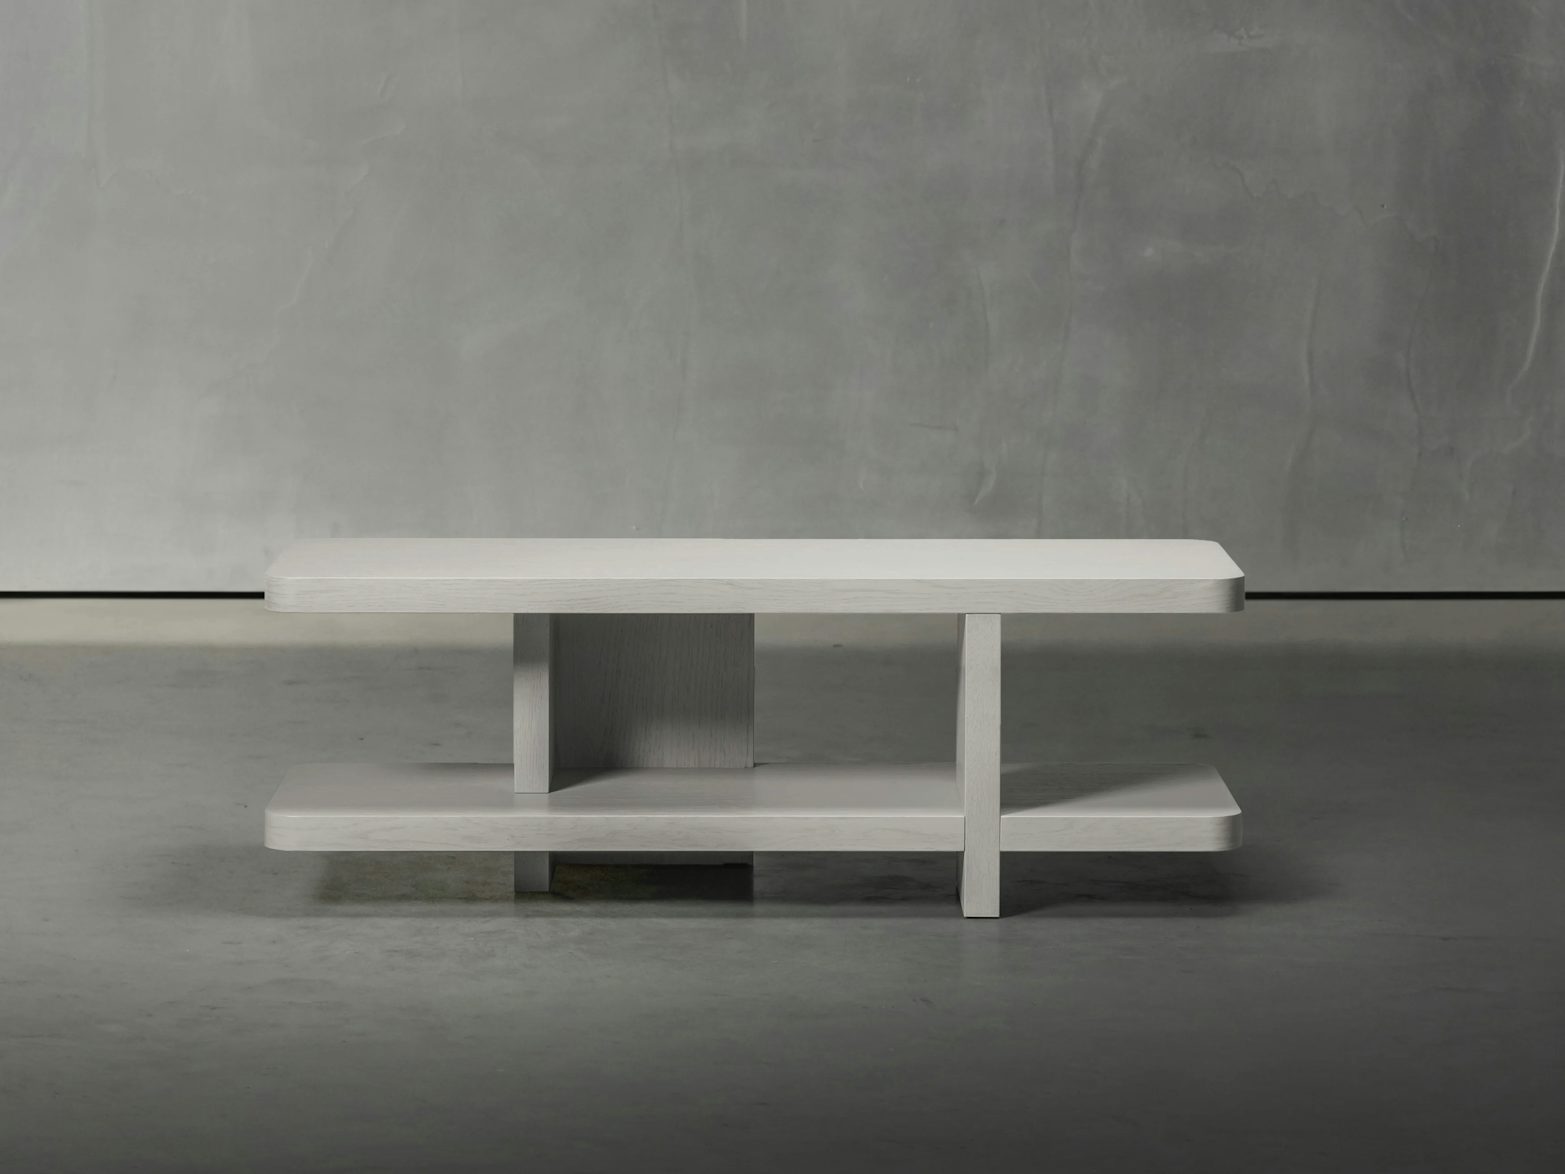 Rens Low Table Piet Boon 2